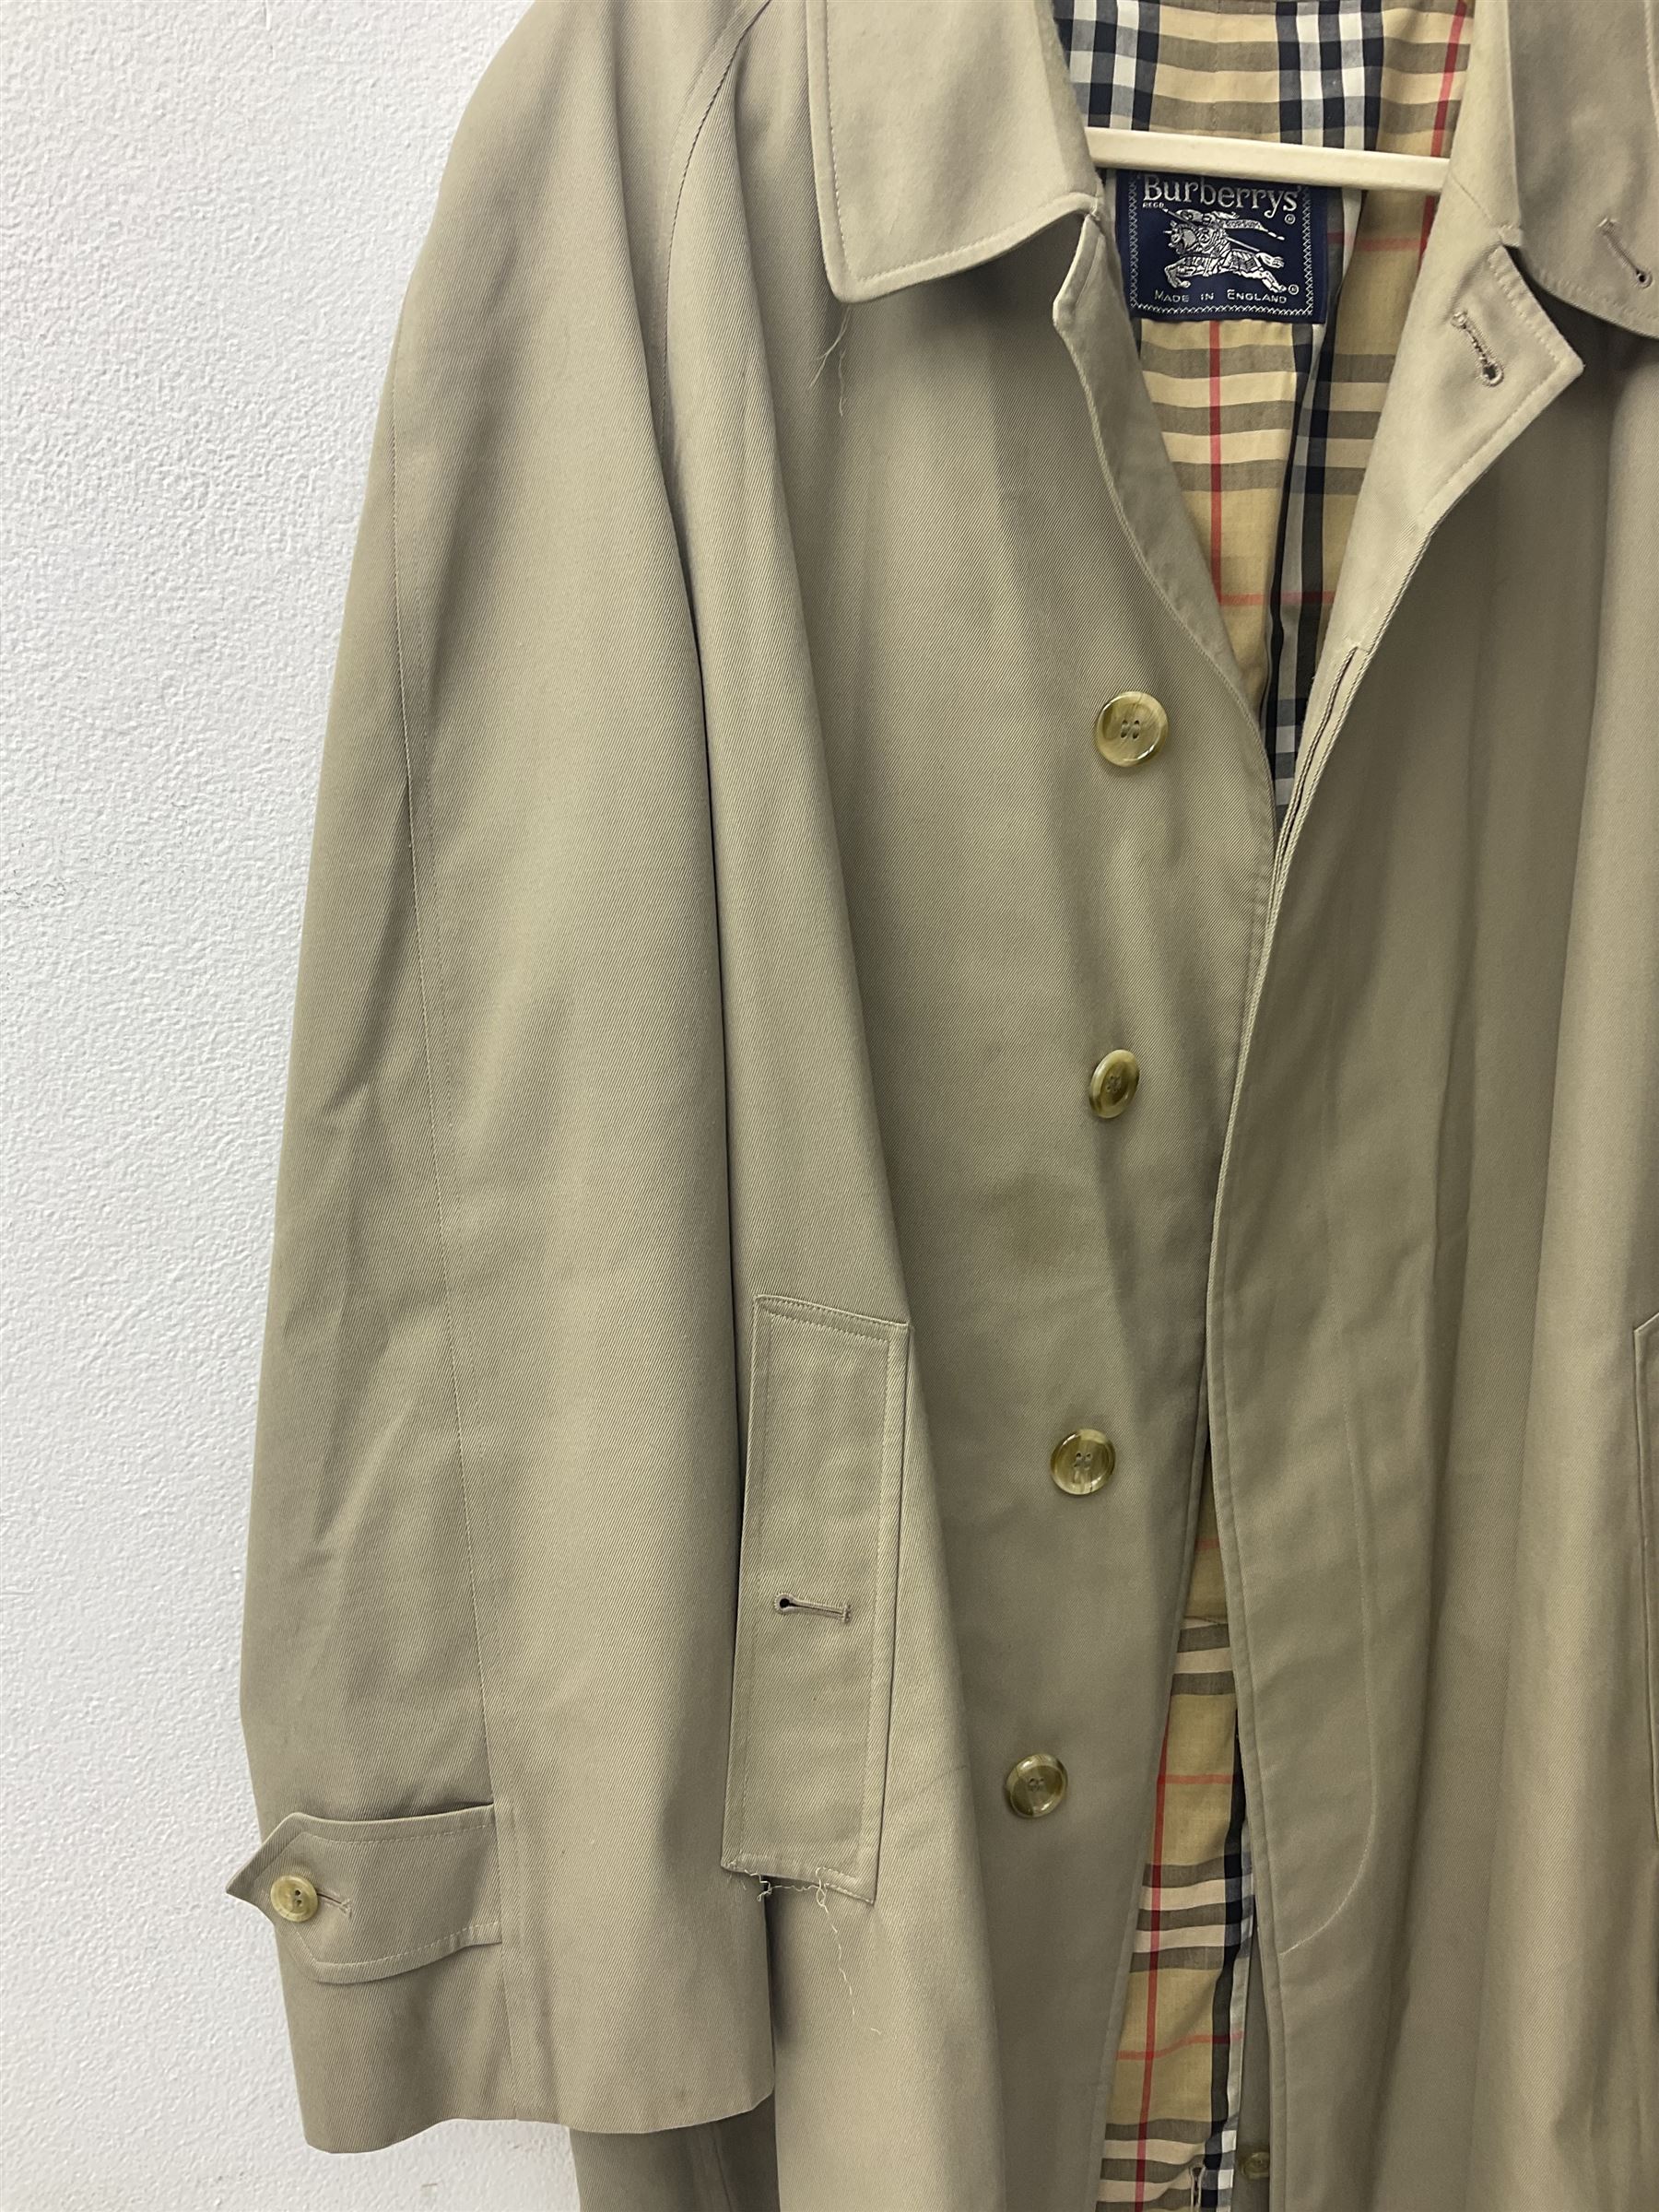 Ladies Burberry double breasted trench coat - Image 16 of 25